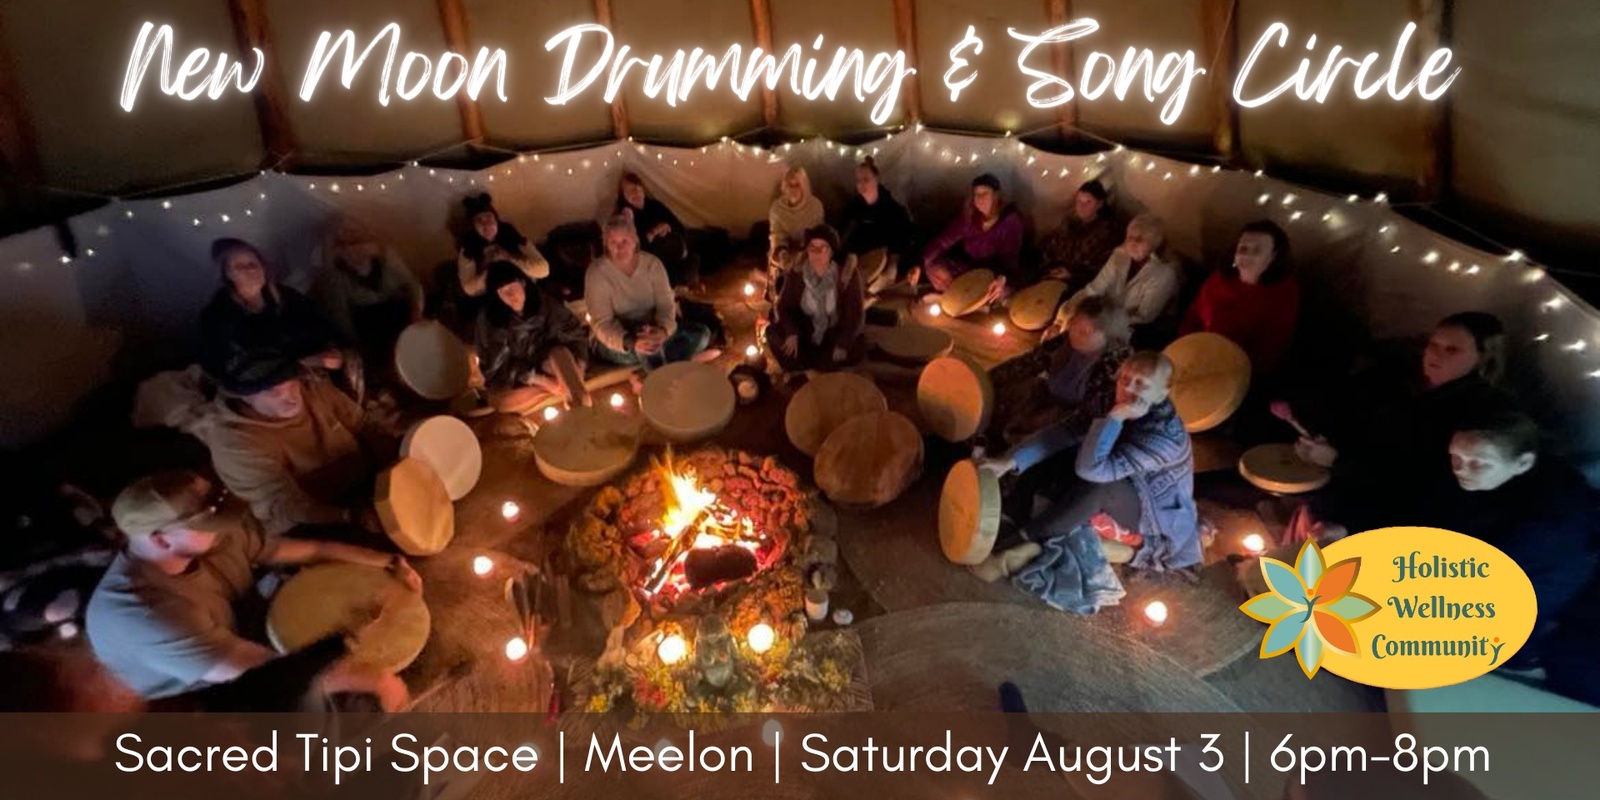 Banner image for New Moon Drumming & Song Circle